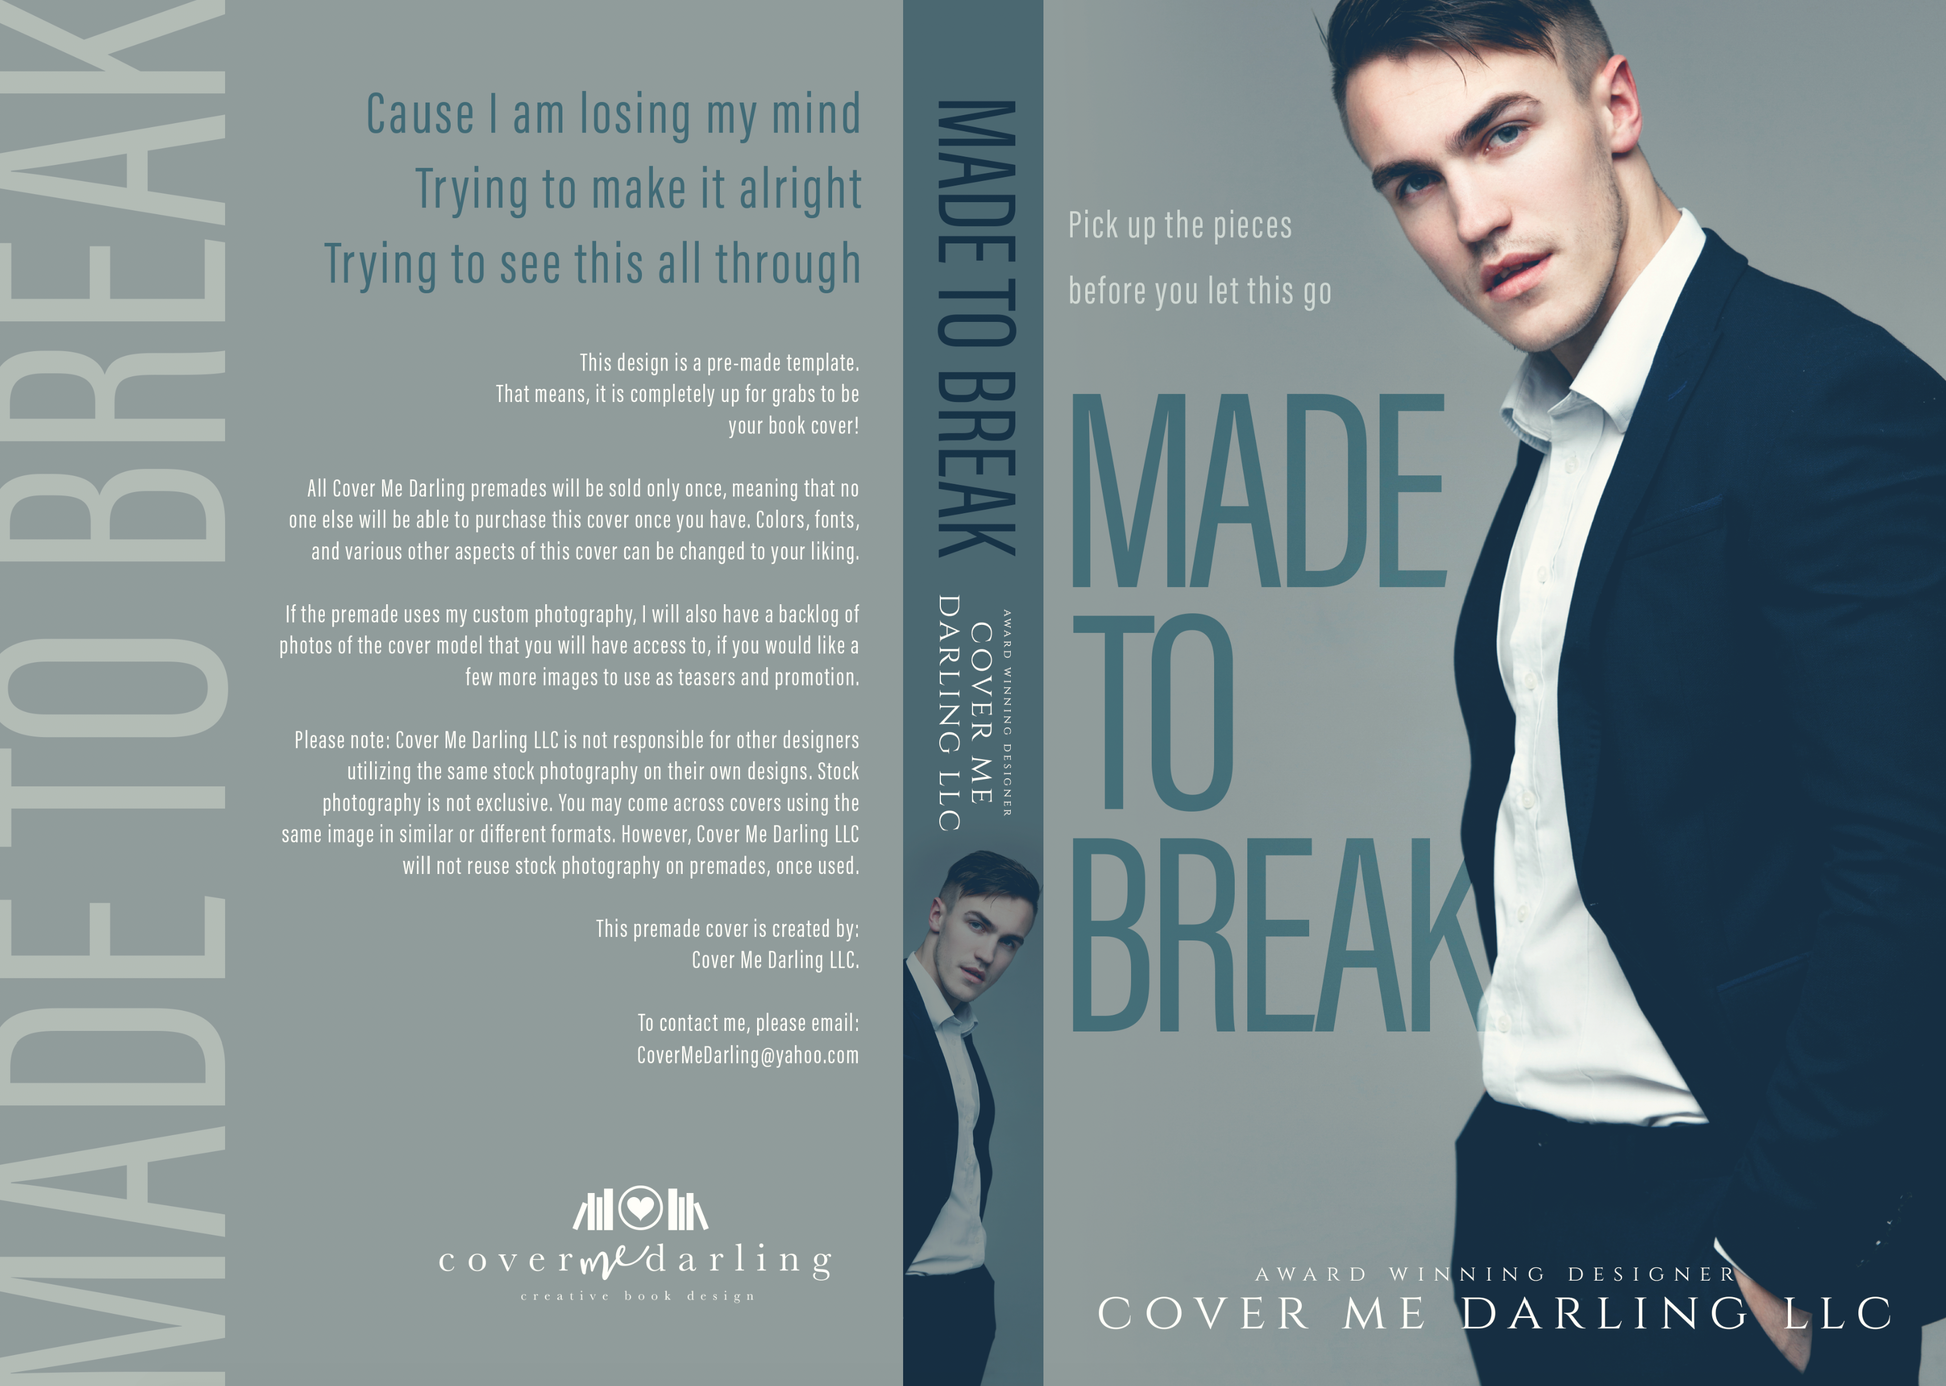 Premade : Made To Break – Cover Me Darling